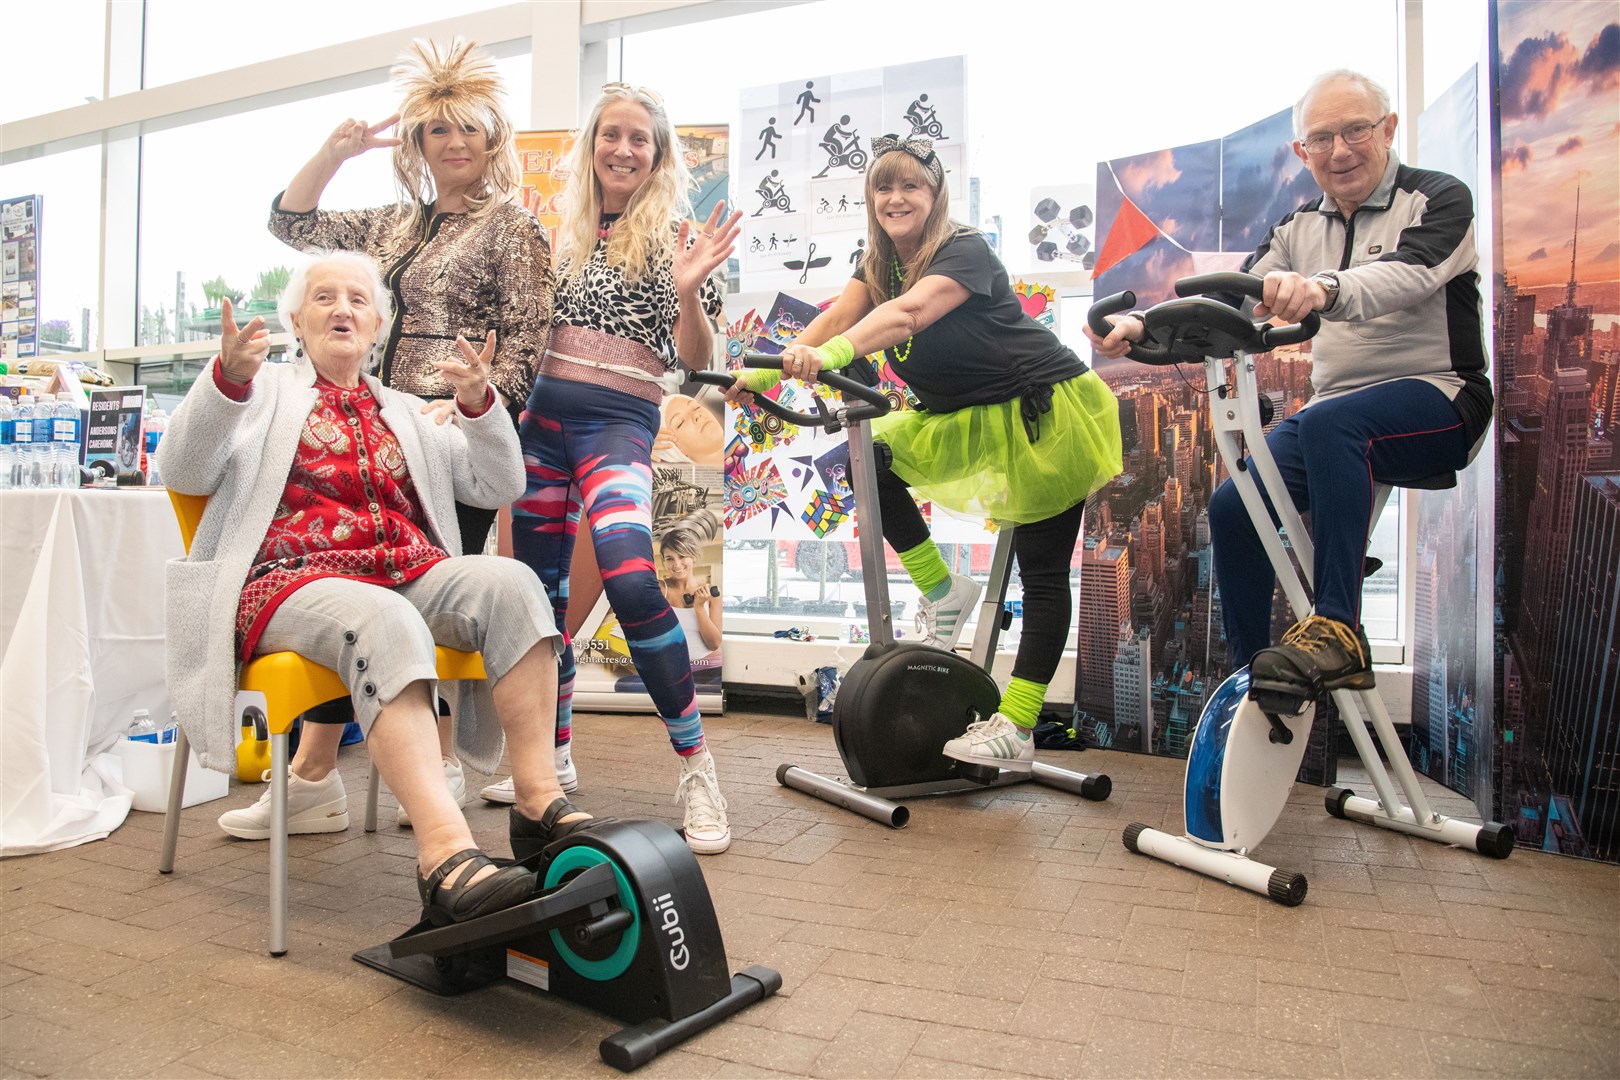 From left: resident Sara Beggs, staff members Joan Cowe and Sarah Granitza, TESCO staff member Tracy Gourley and Anderson's Chairman Iain Jamieson joined together at Tesco for an 80's fundraiser. Picture: Daniel Forsyth